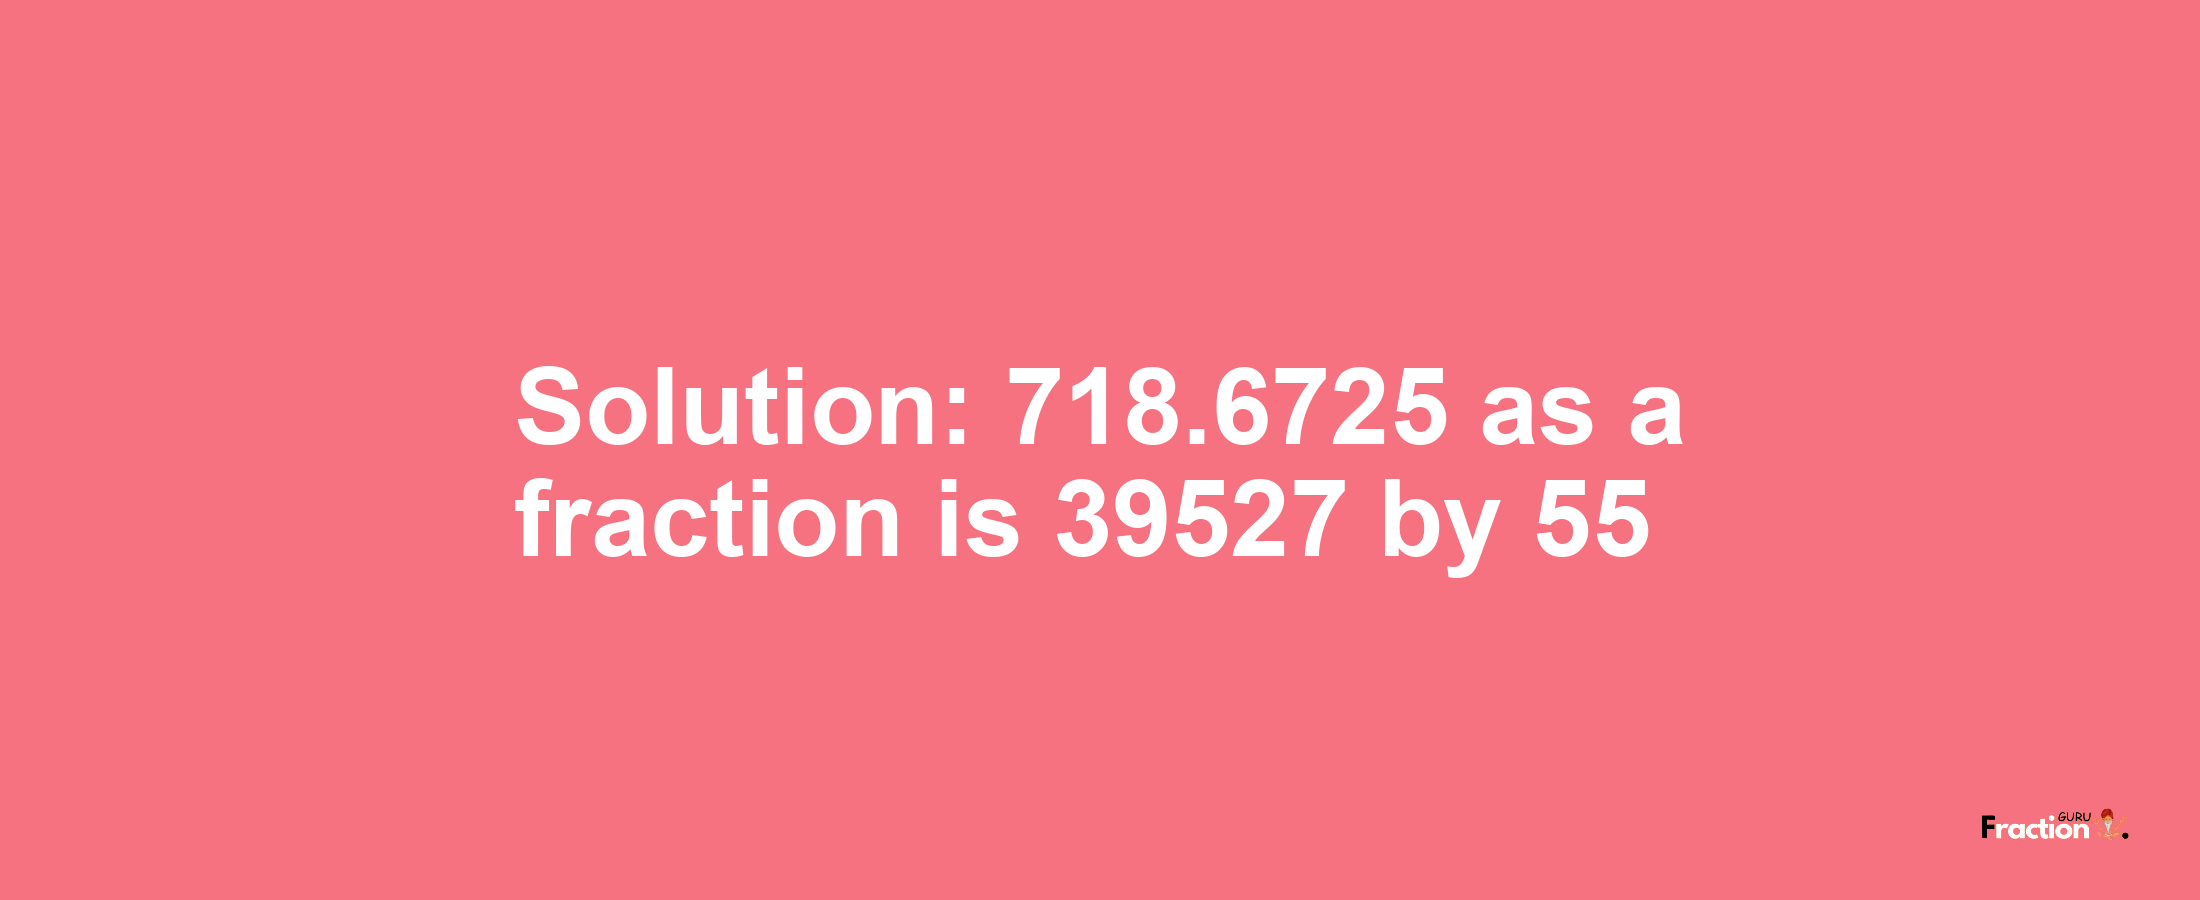 Solution:718.6725 as a fraction is 39527/55